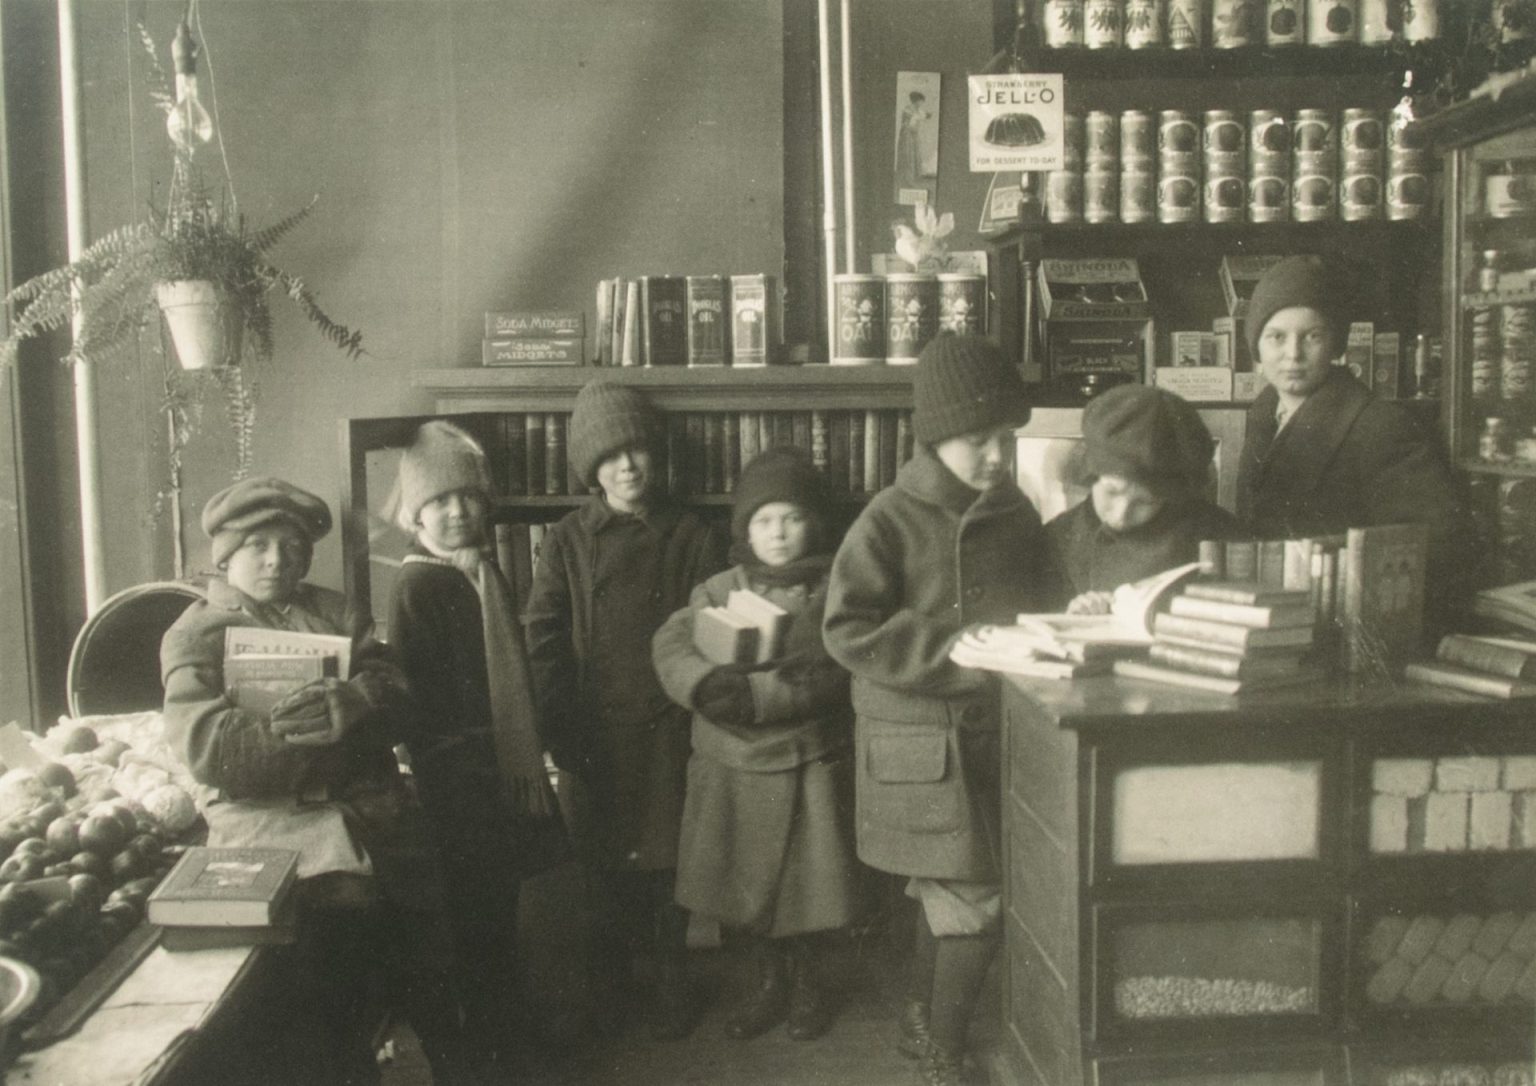 Children in winter hats and coats hold books in front of grocery store shelves in this black and white photo.